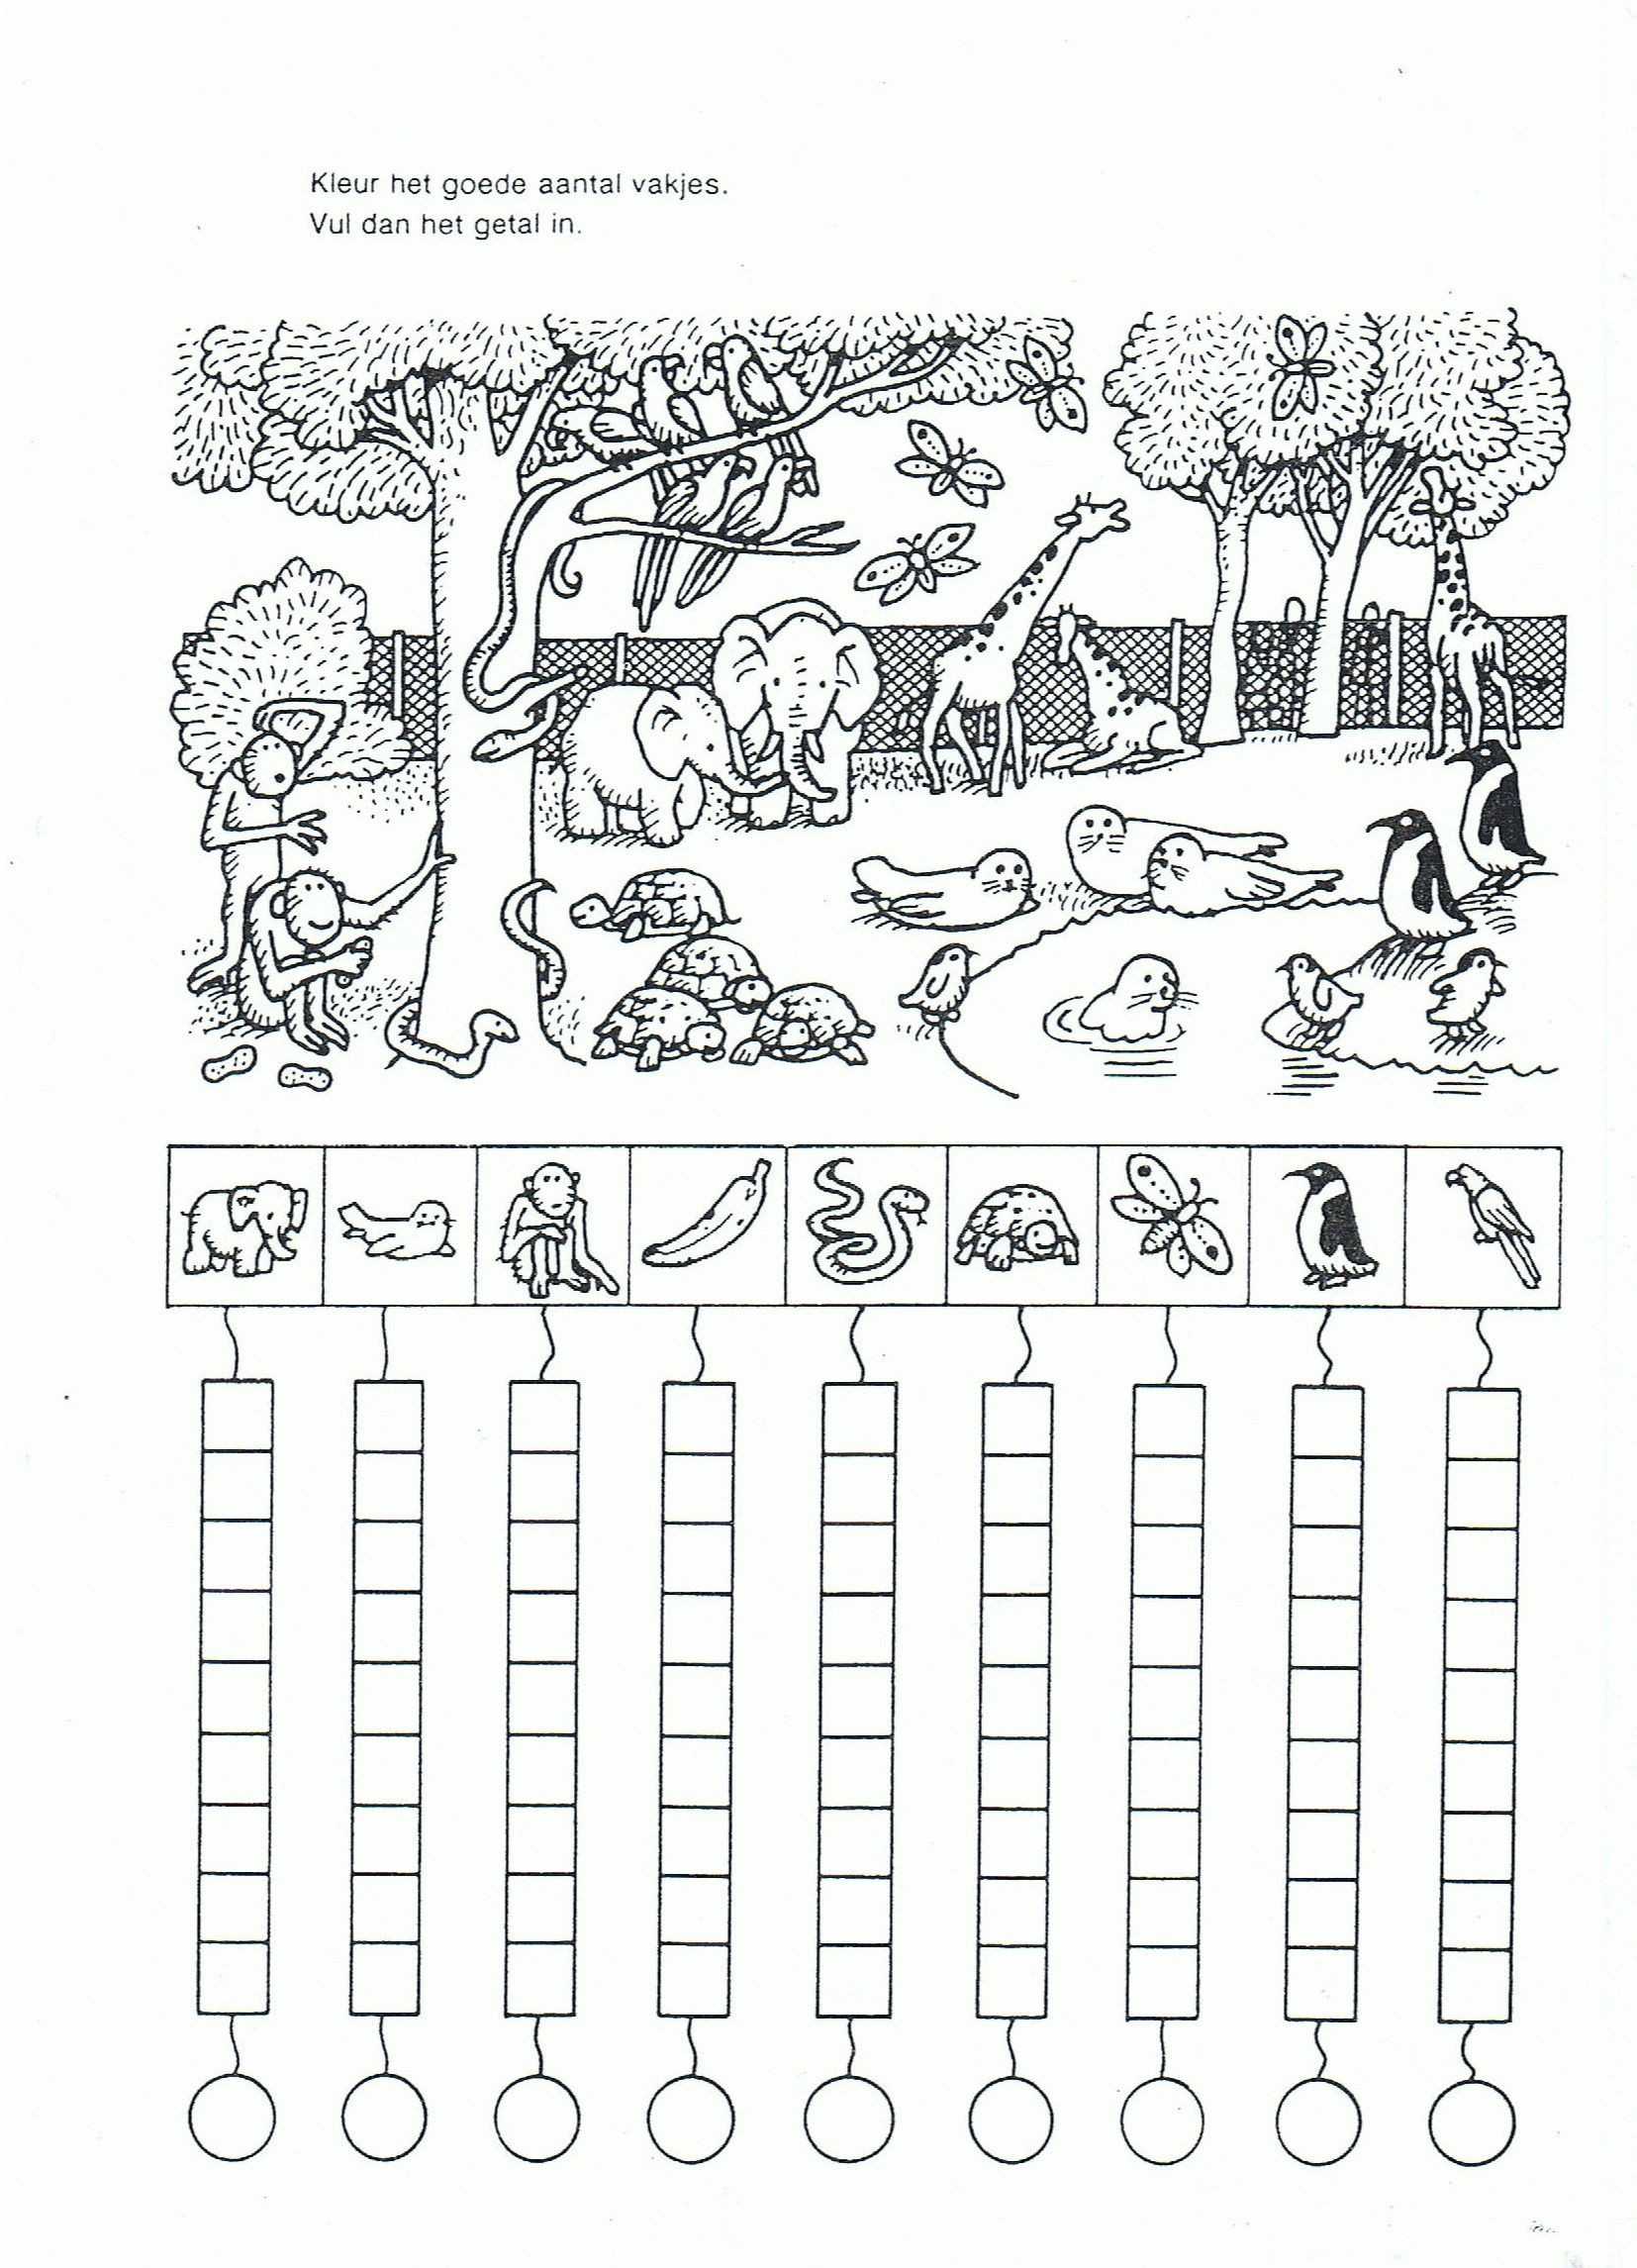 Custom Name Tracing Worksheets as Well as 50 New Pics Tracing Sheets for Preschool